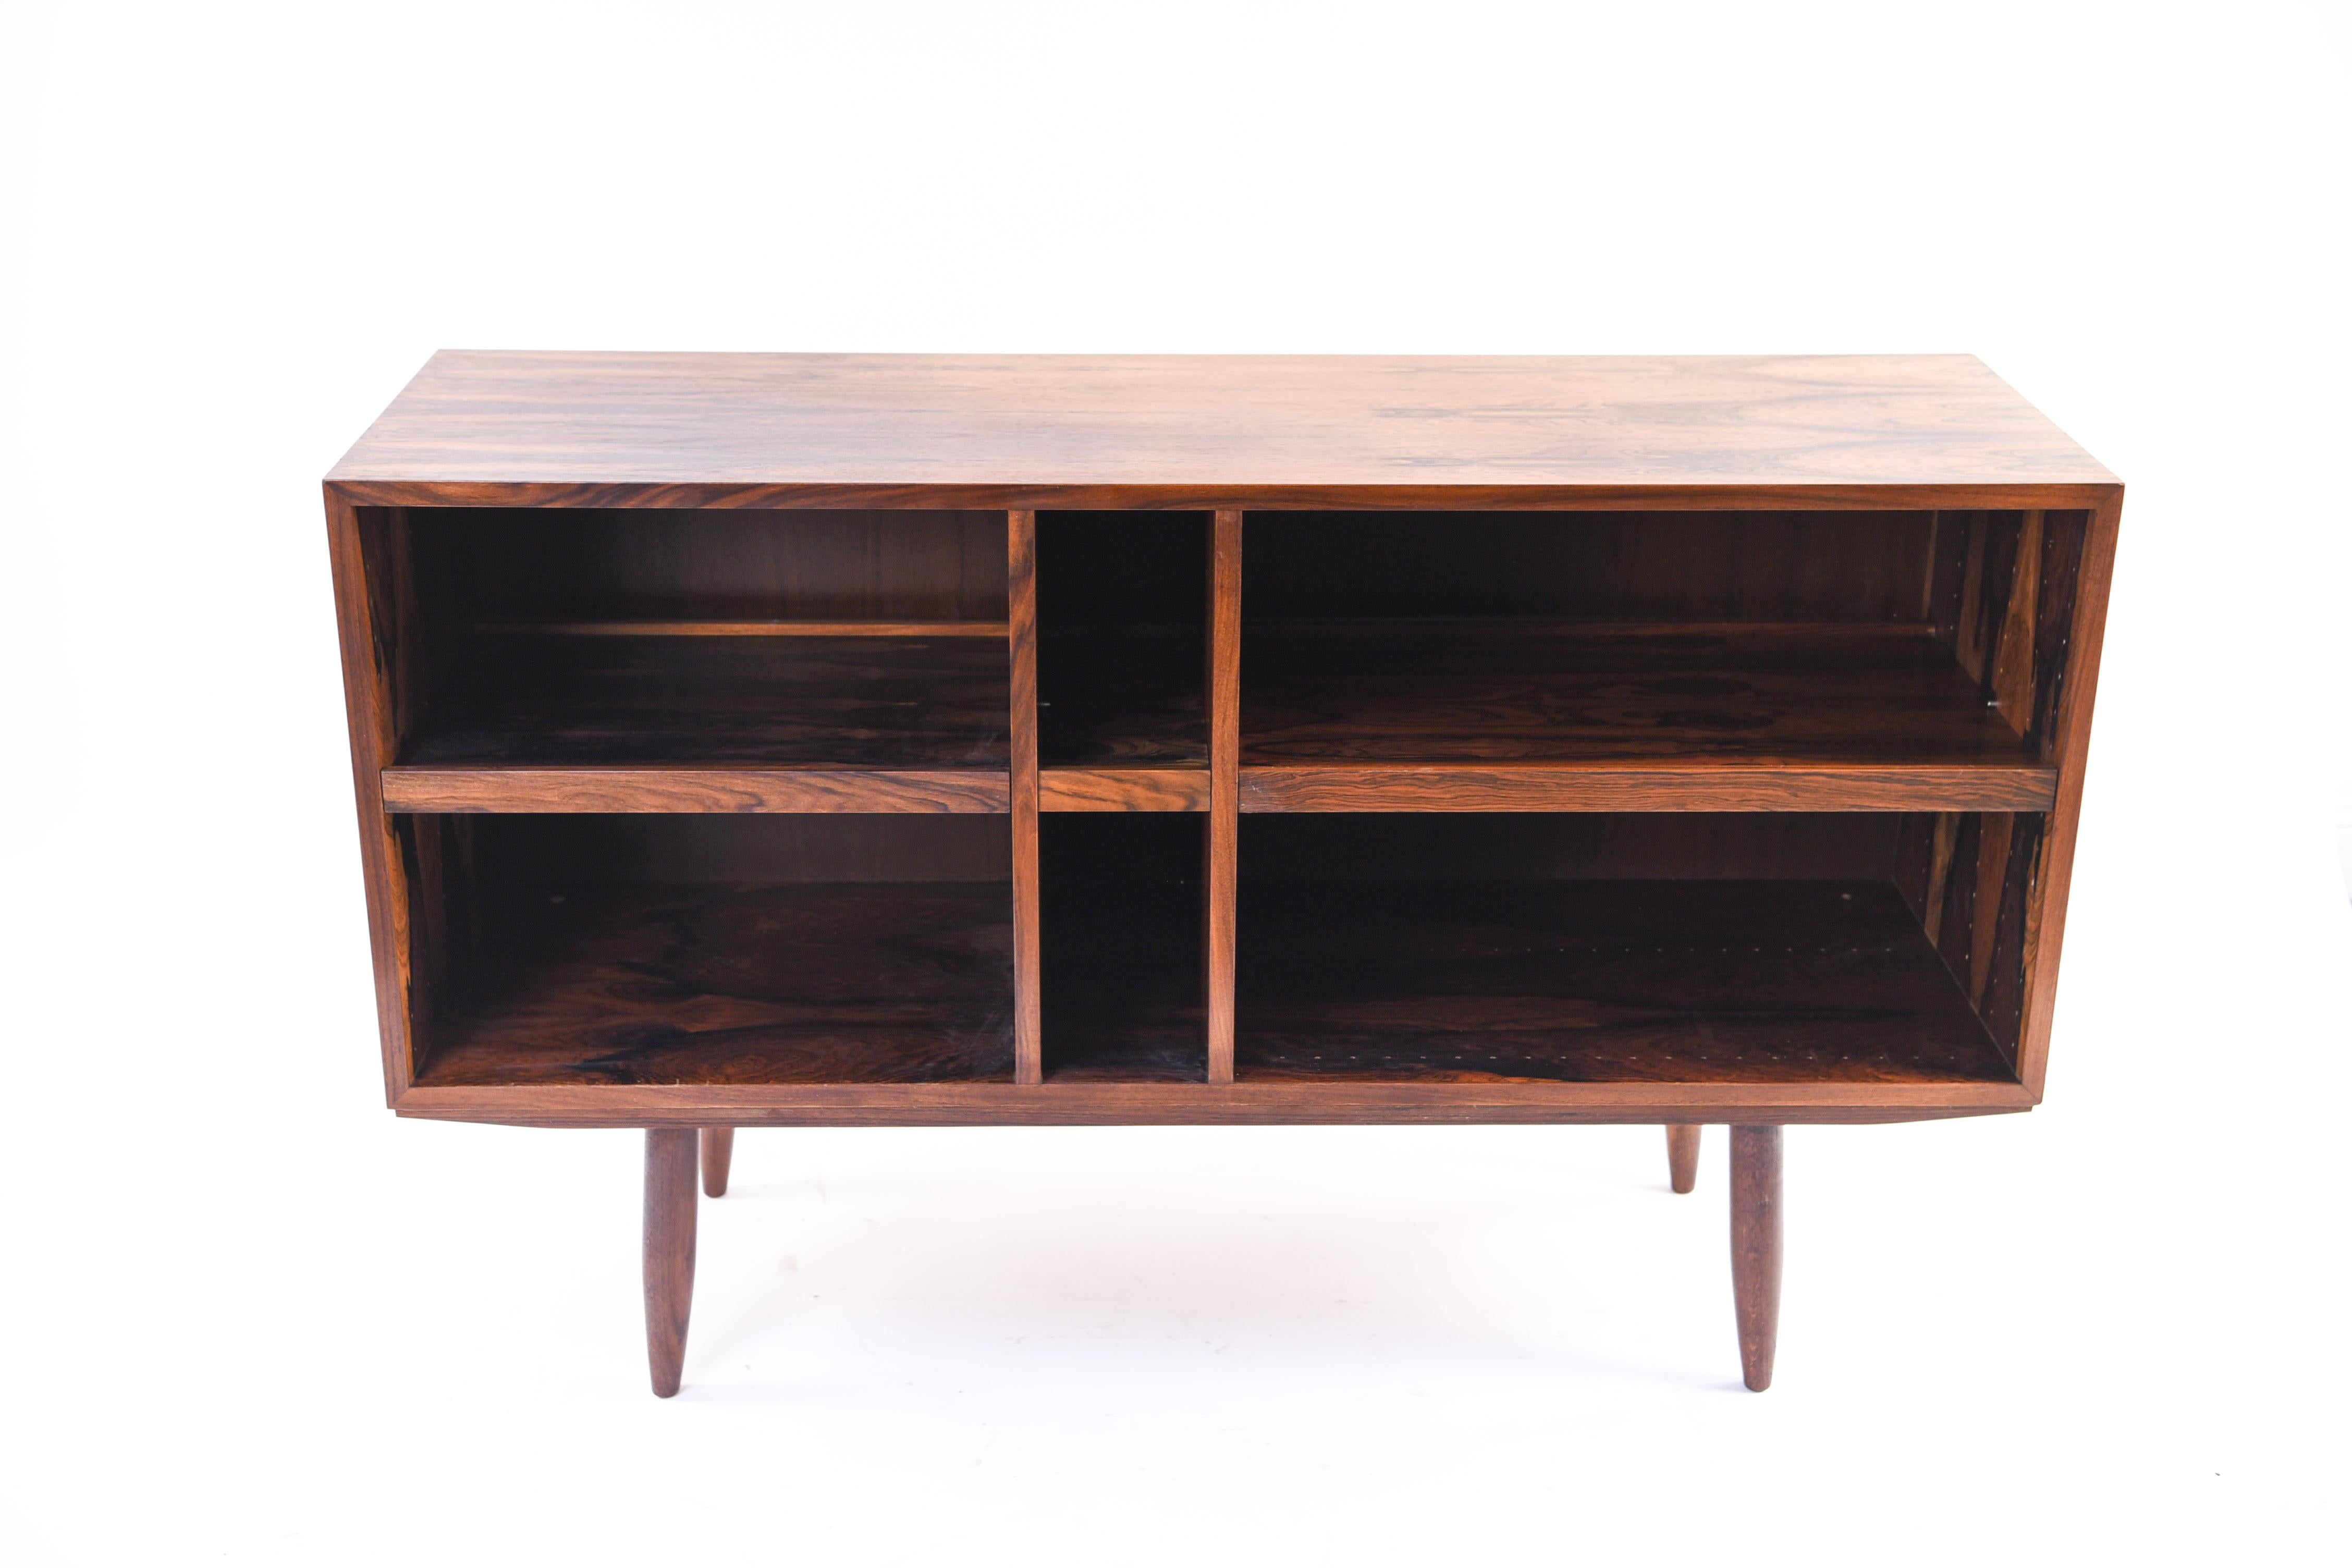 This open-faced Danish midcentury stereo cabinet could double as a storage or display piece with its compartmentalized interior. The body of the cabinet sits upon sturdy, turned legs, characteristic of Scandinavian Modern design. The rosewood gives